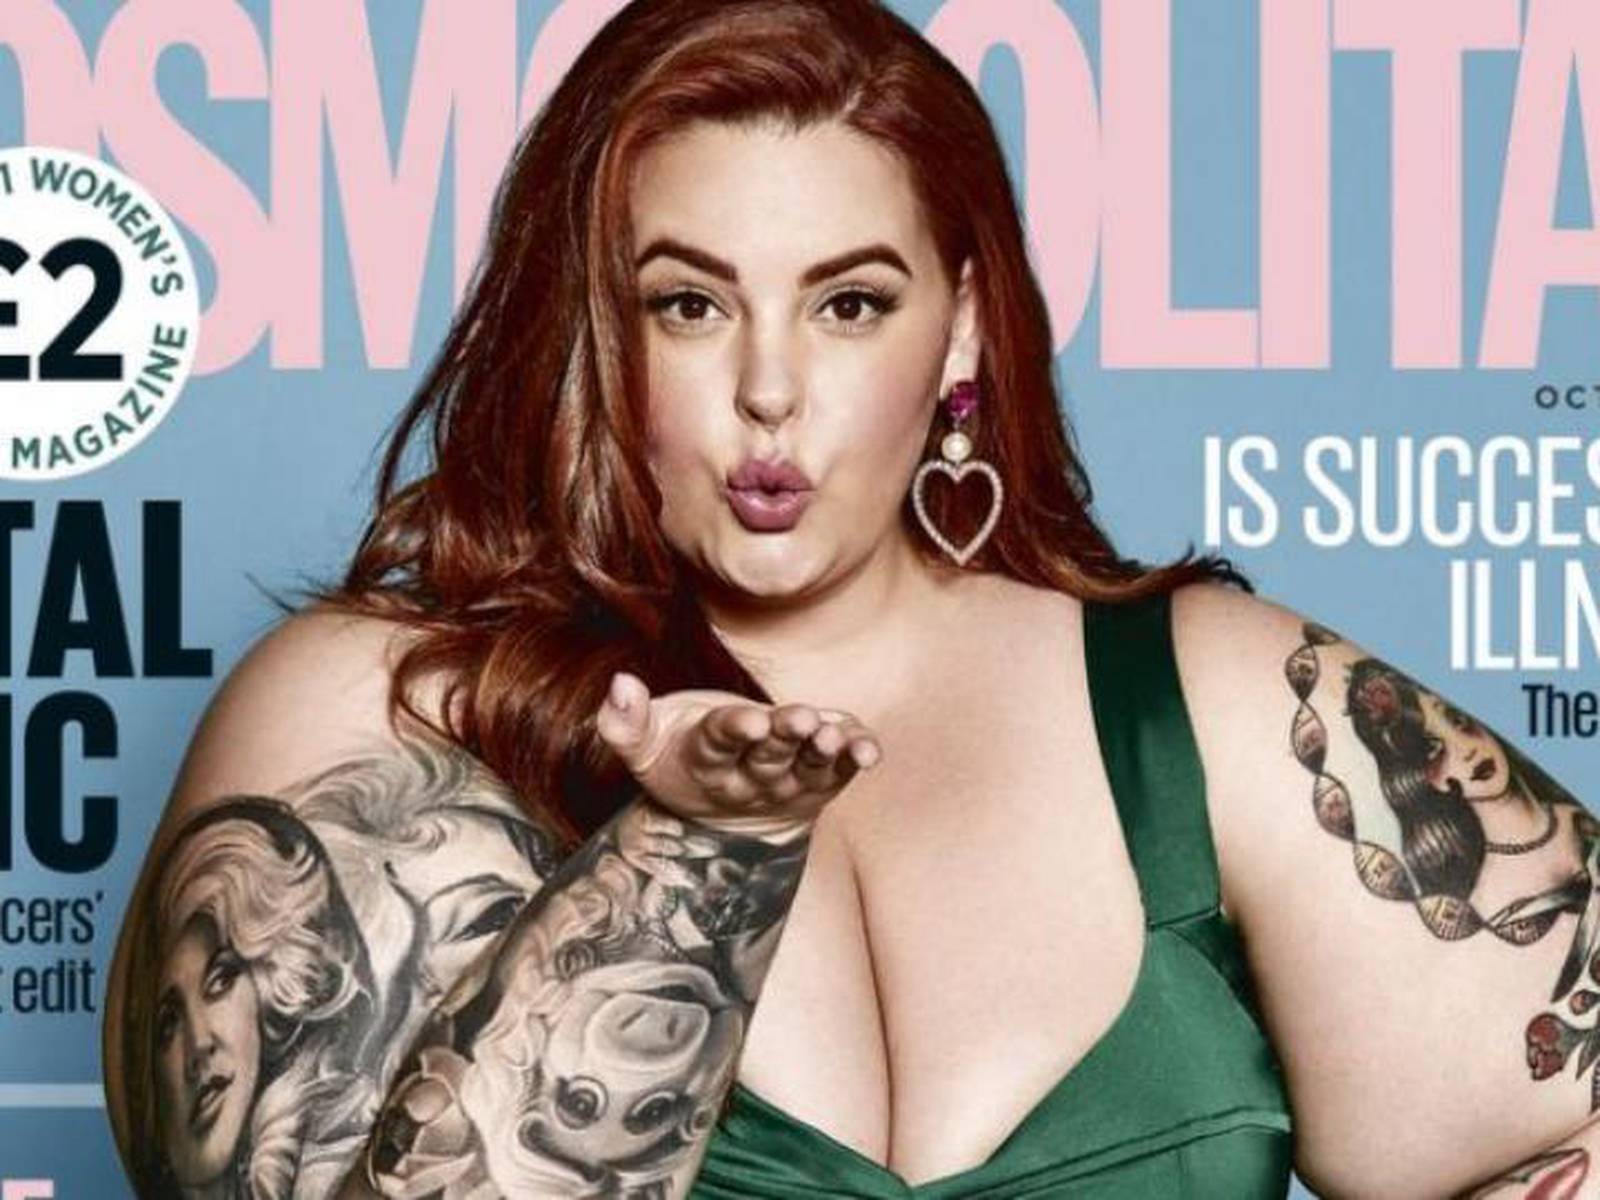 School Bbw - Cosmopolitan magazine cover criticised for 'promoting obesity' â€“ The Irish  Times